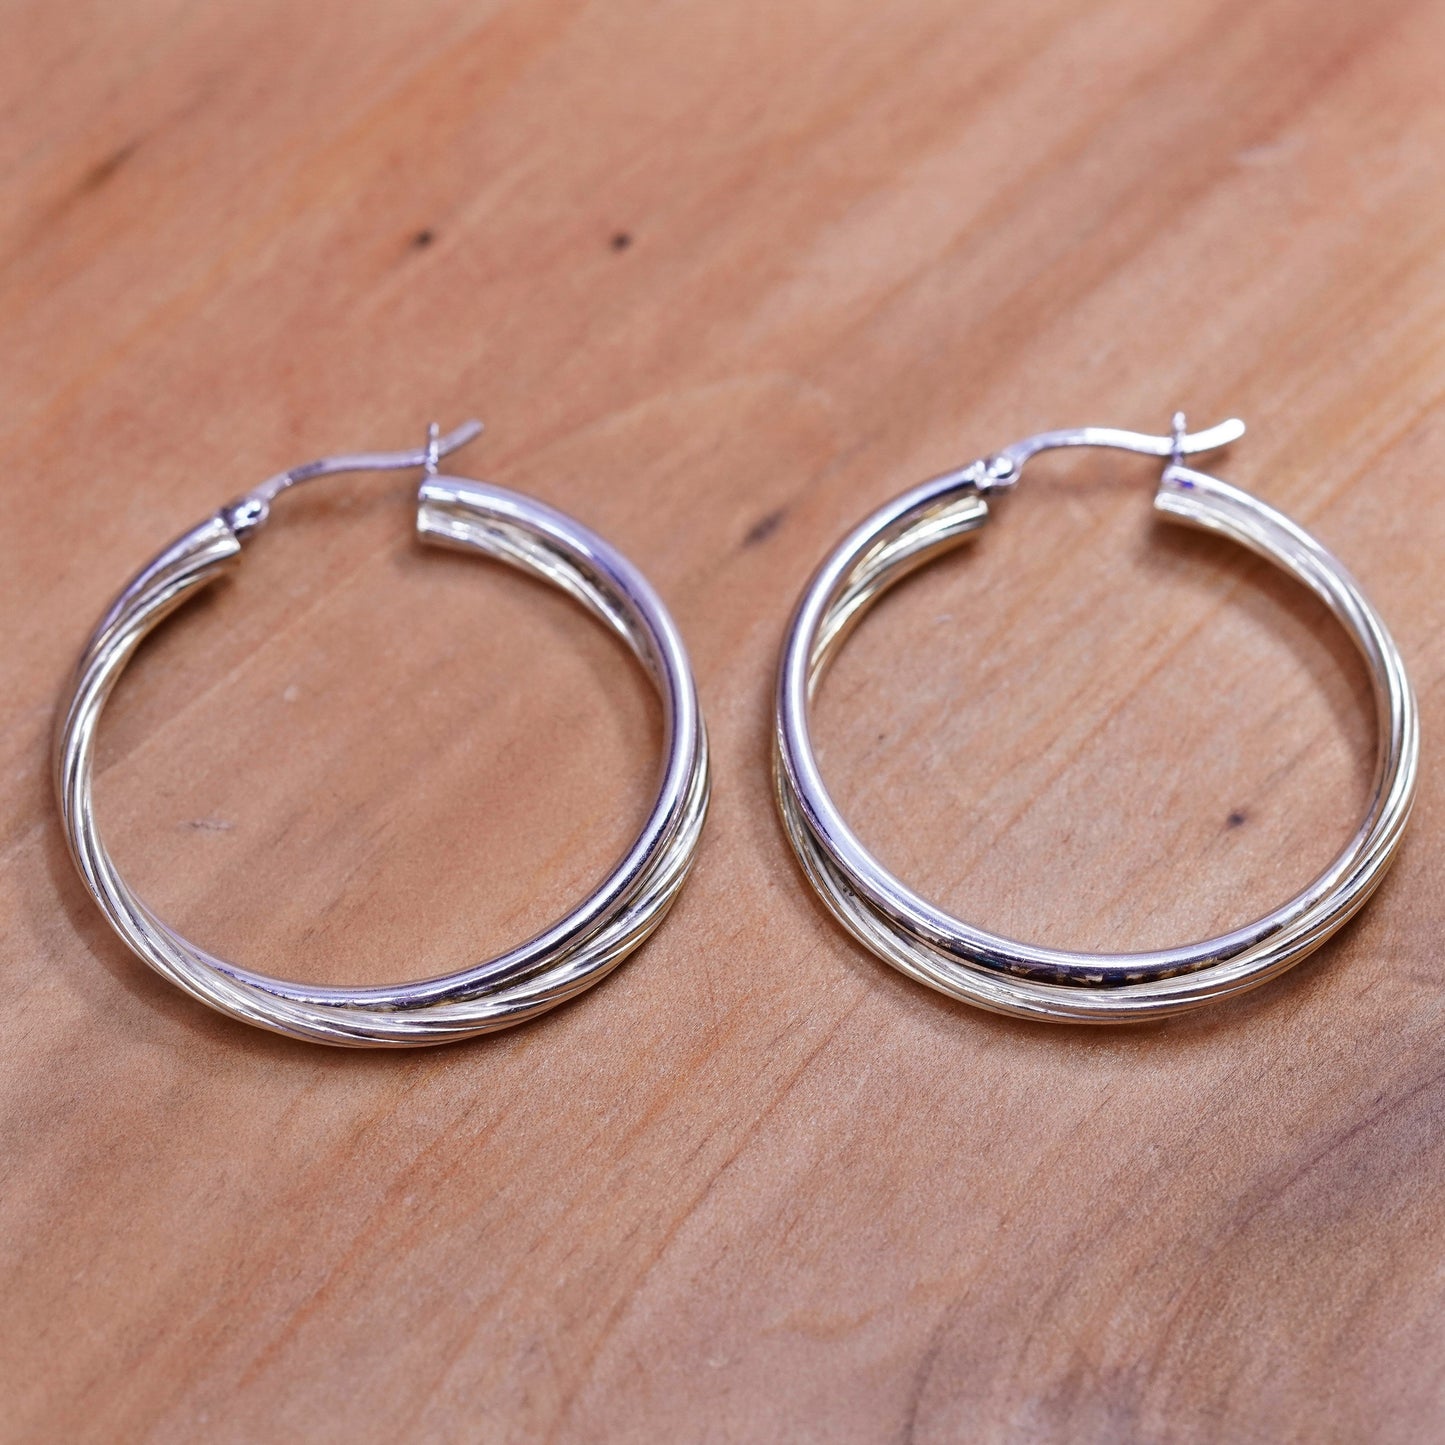 1.5”, two tone Sterling silver handmade earrings, 925 silver entwined circle